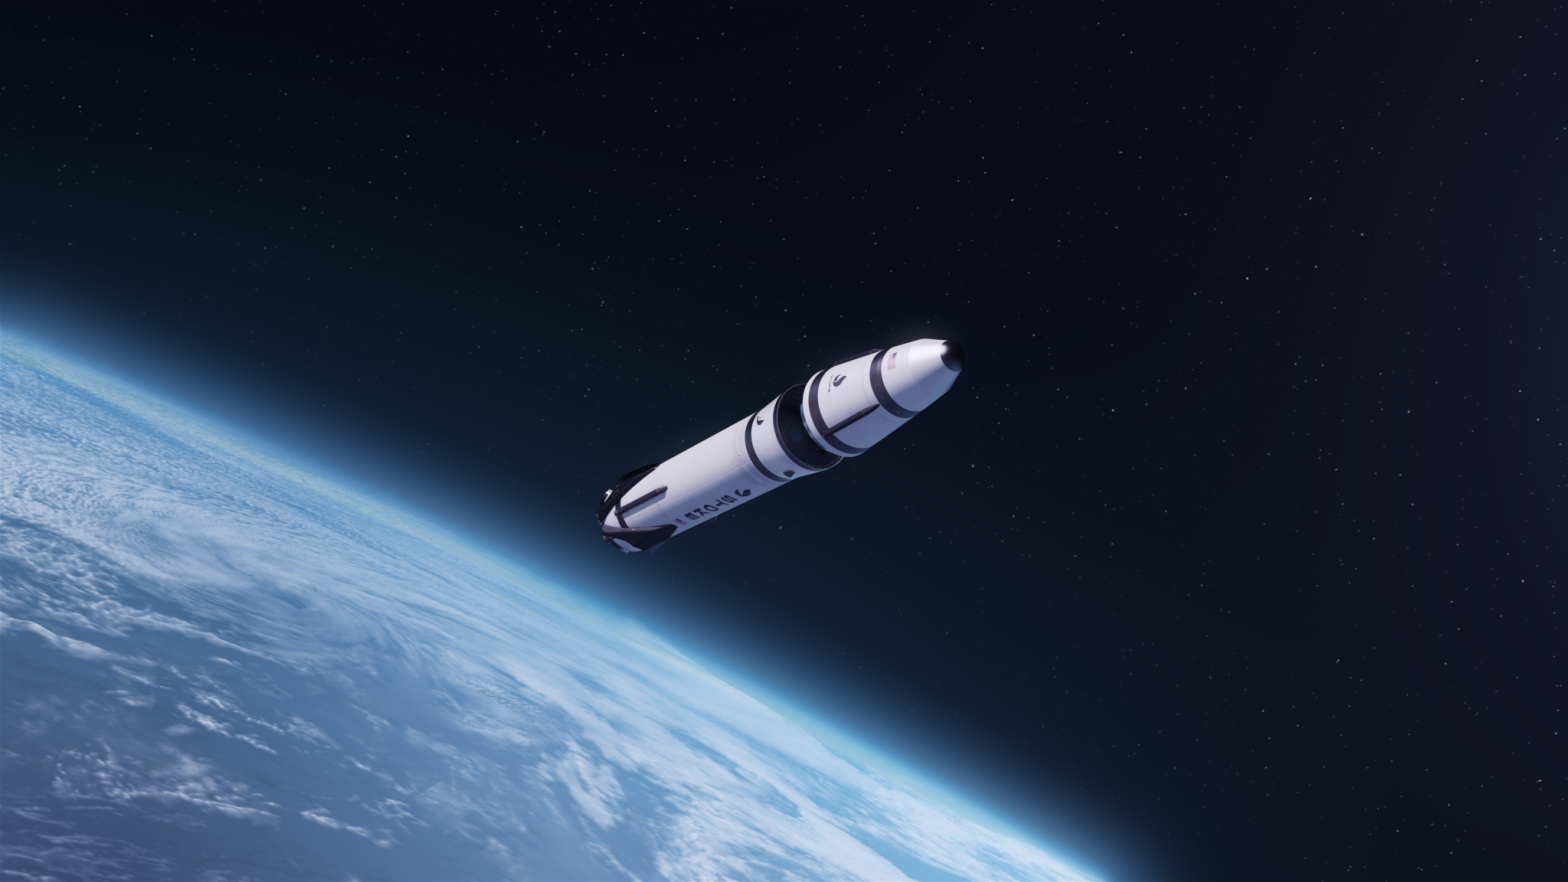 An illustration of Stoke Space's fully reusable rocket. (Illustration: Stoke Space)